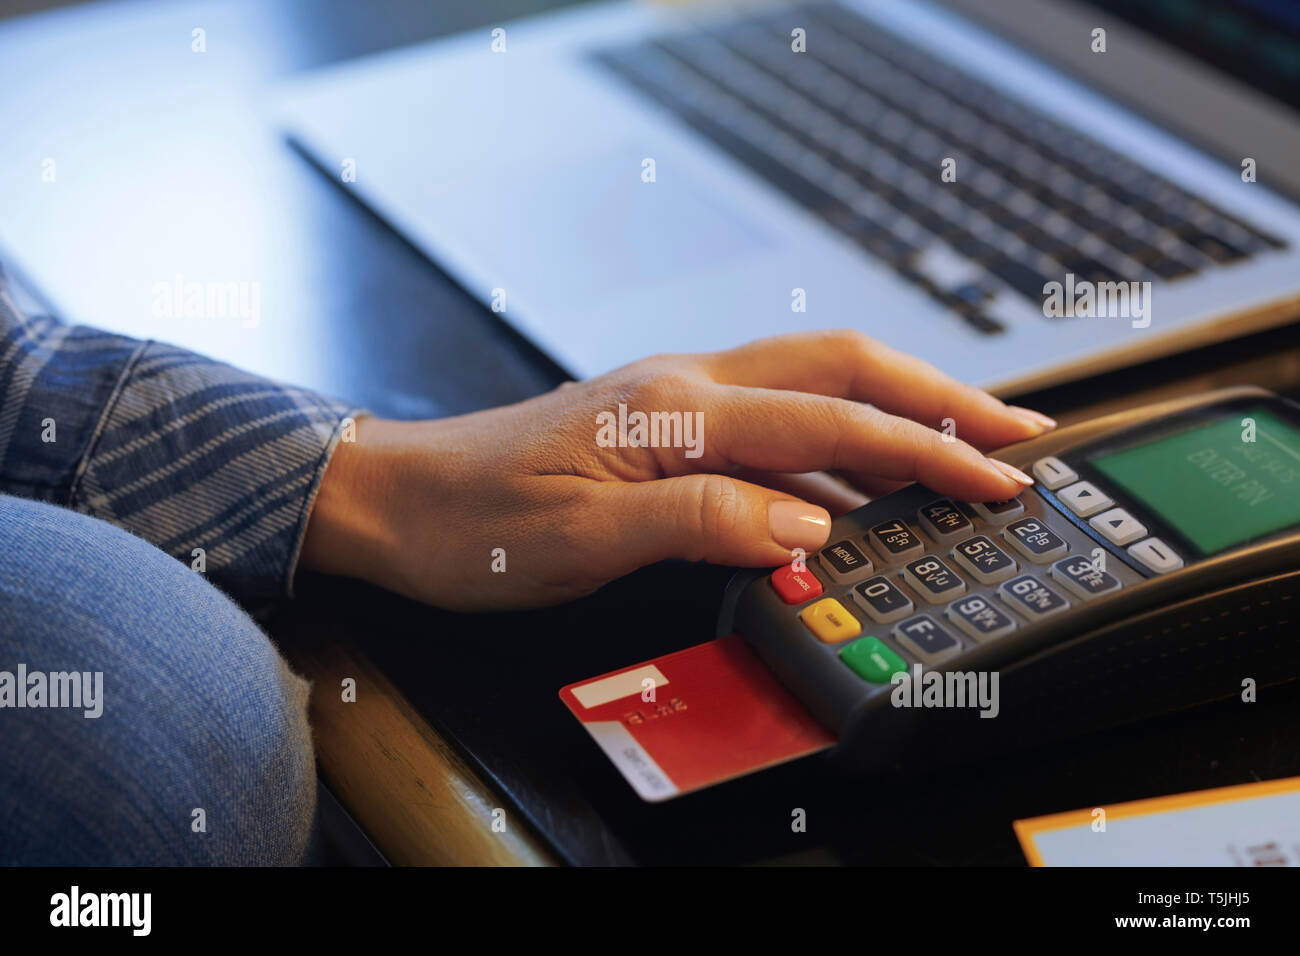 Woman with laptop using online banking, close-up Stock Photo